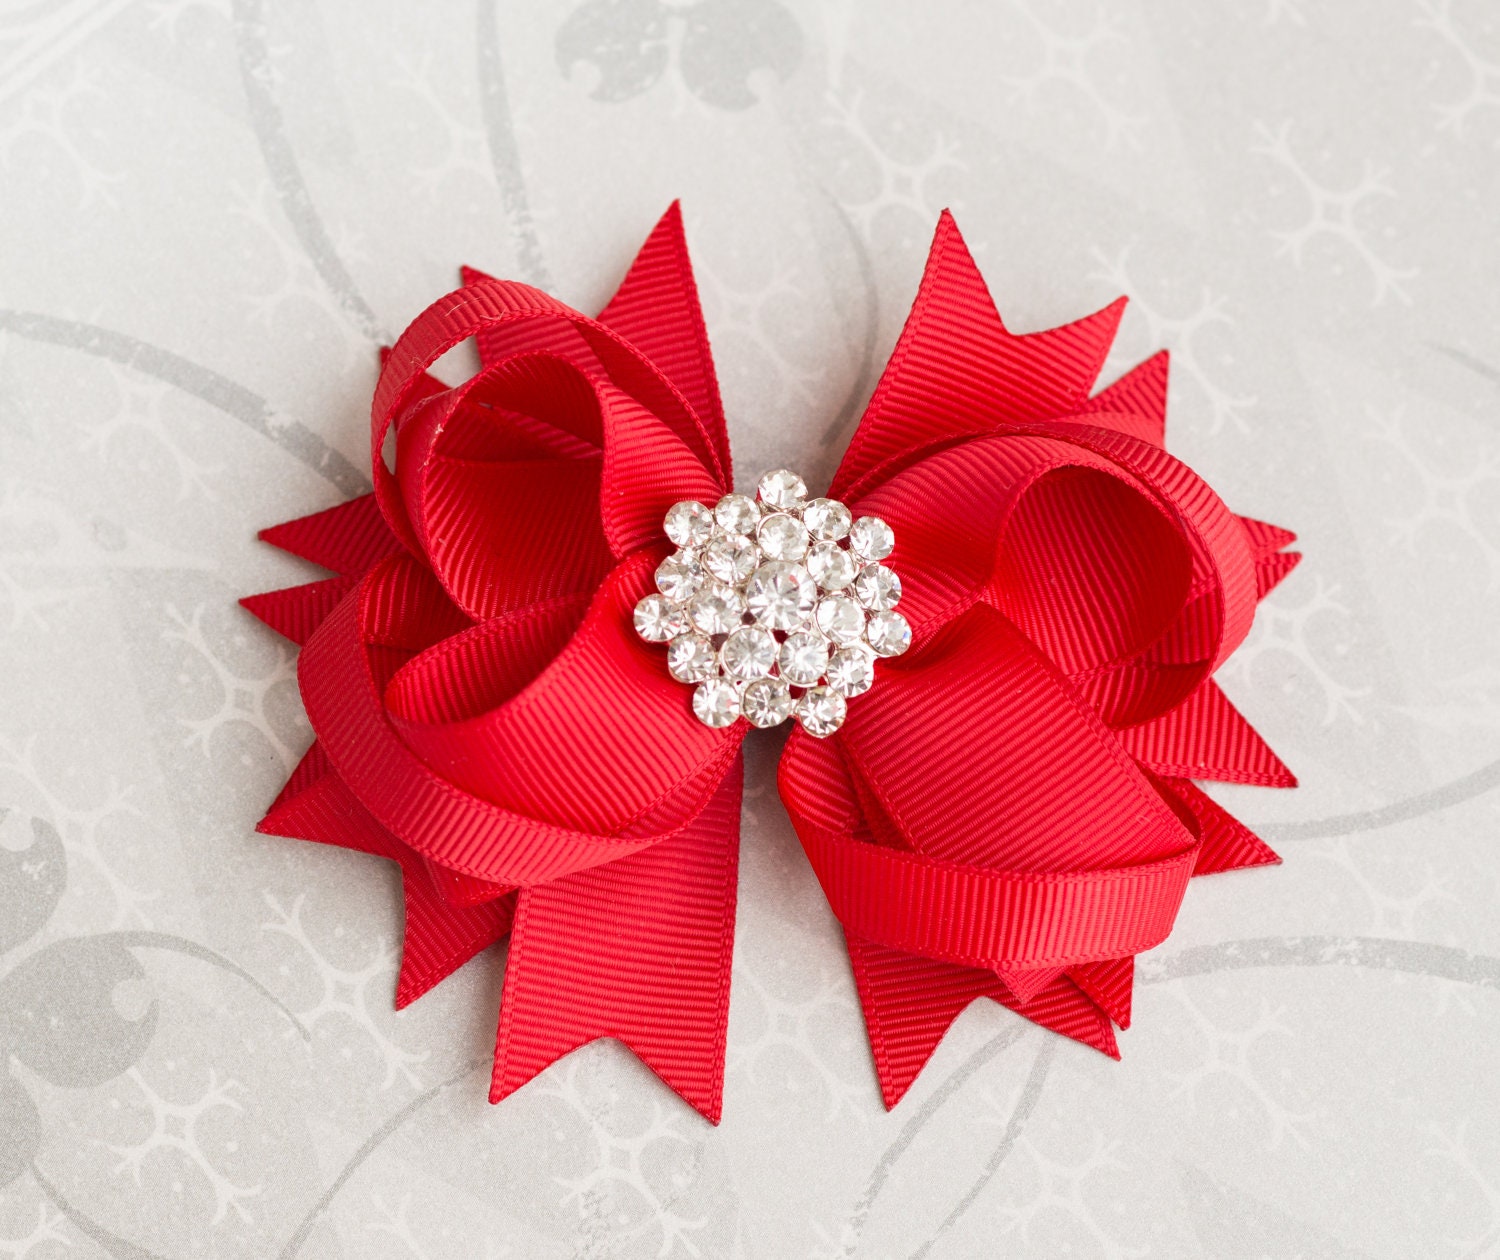 Items similar to Christmas hairbow - Red Boutique bow - Hair bow on Etsy